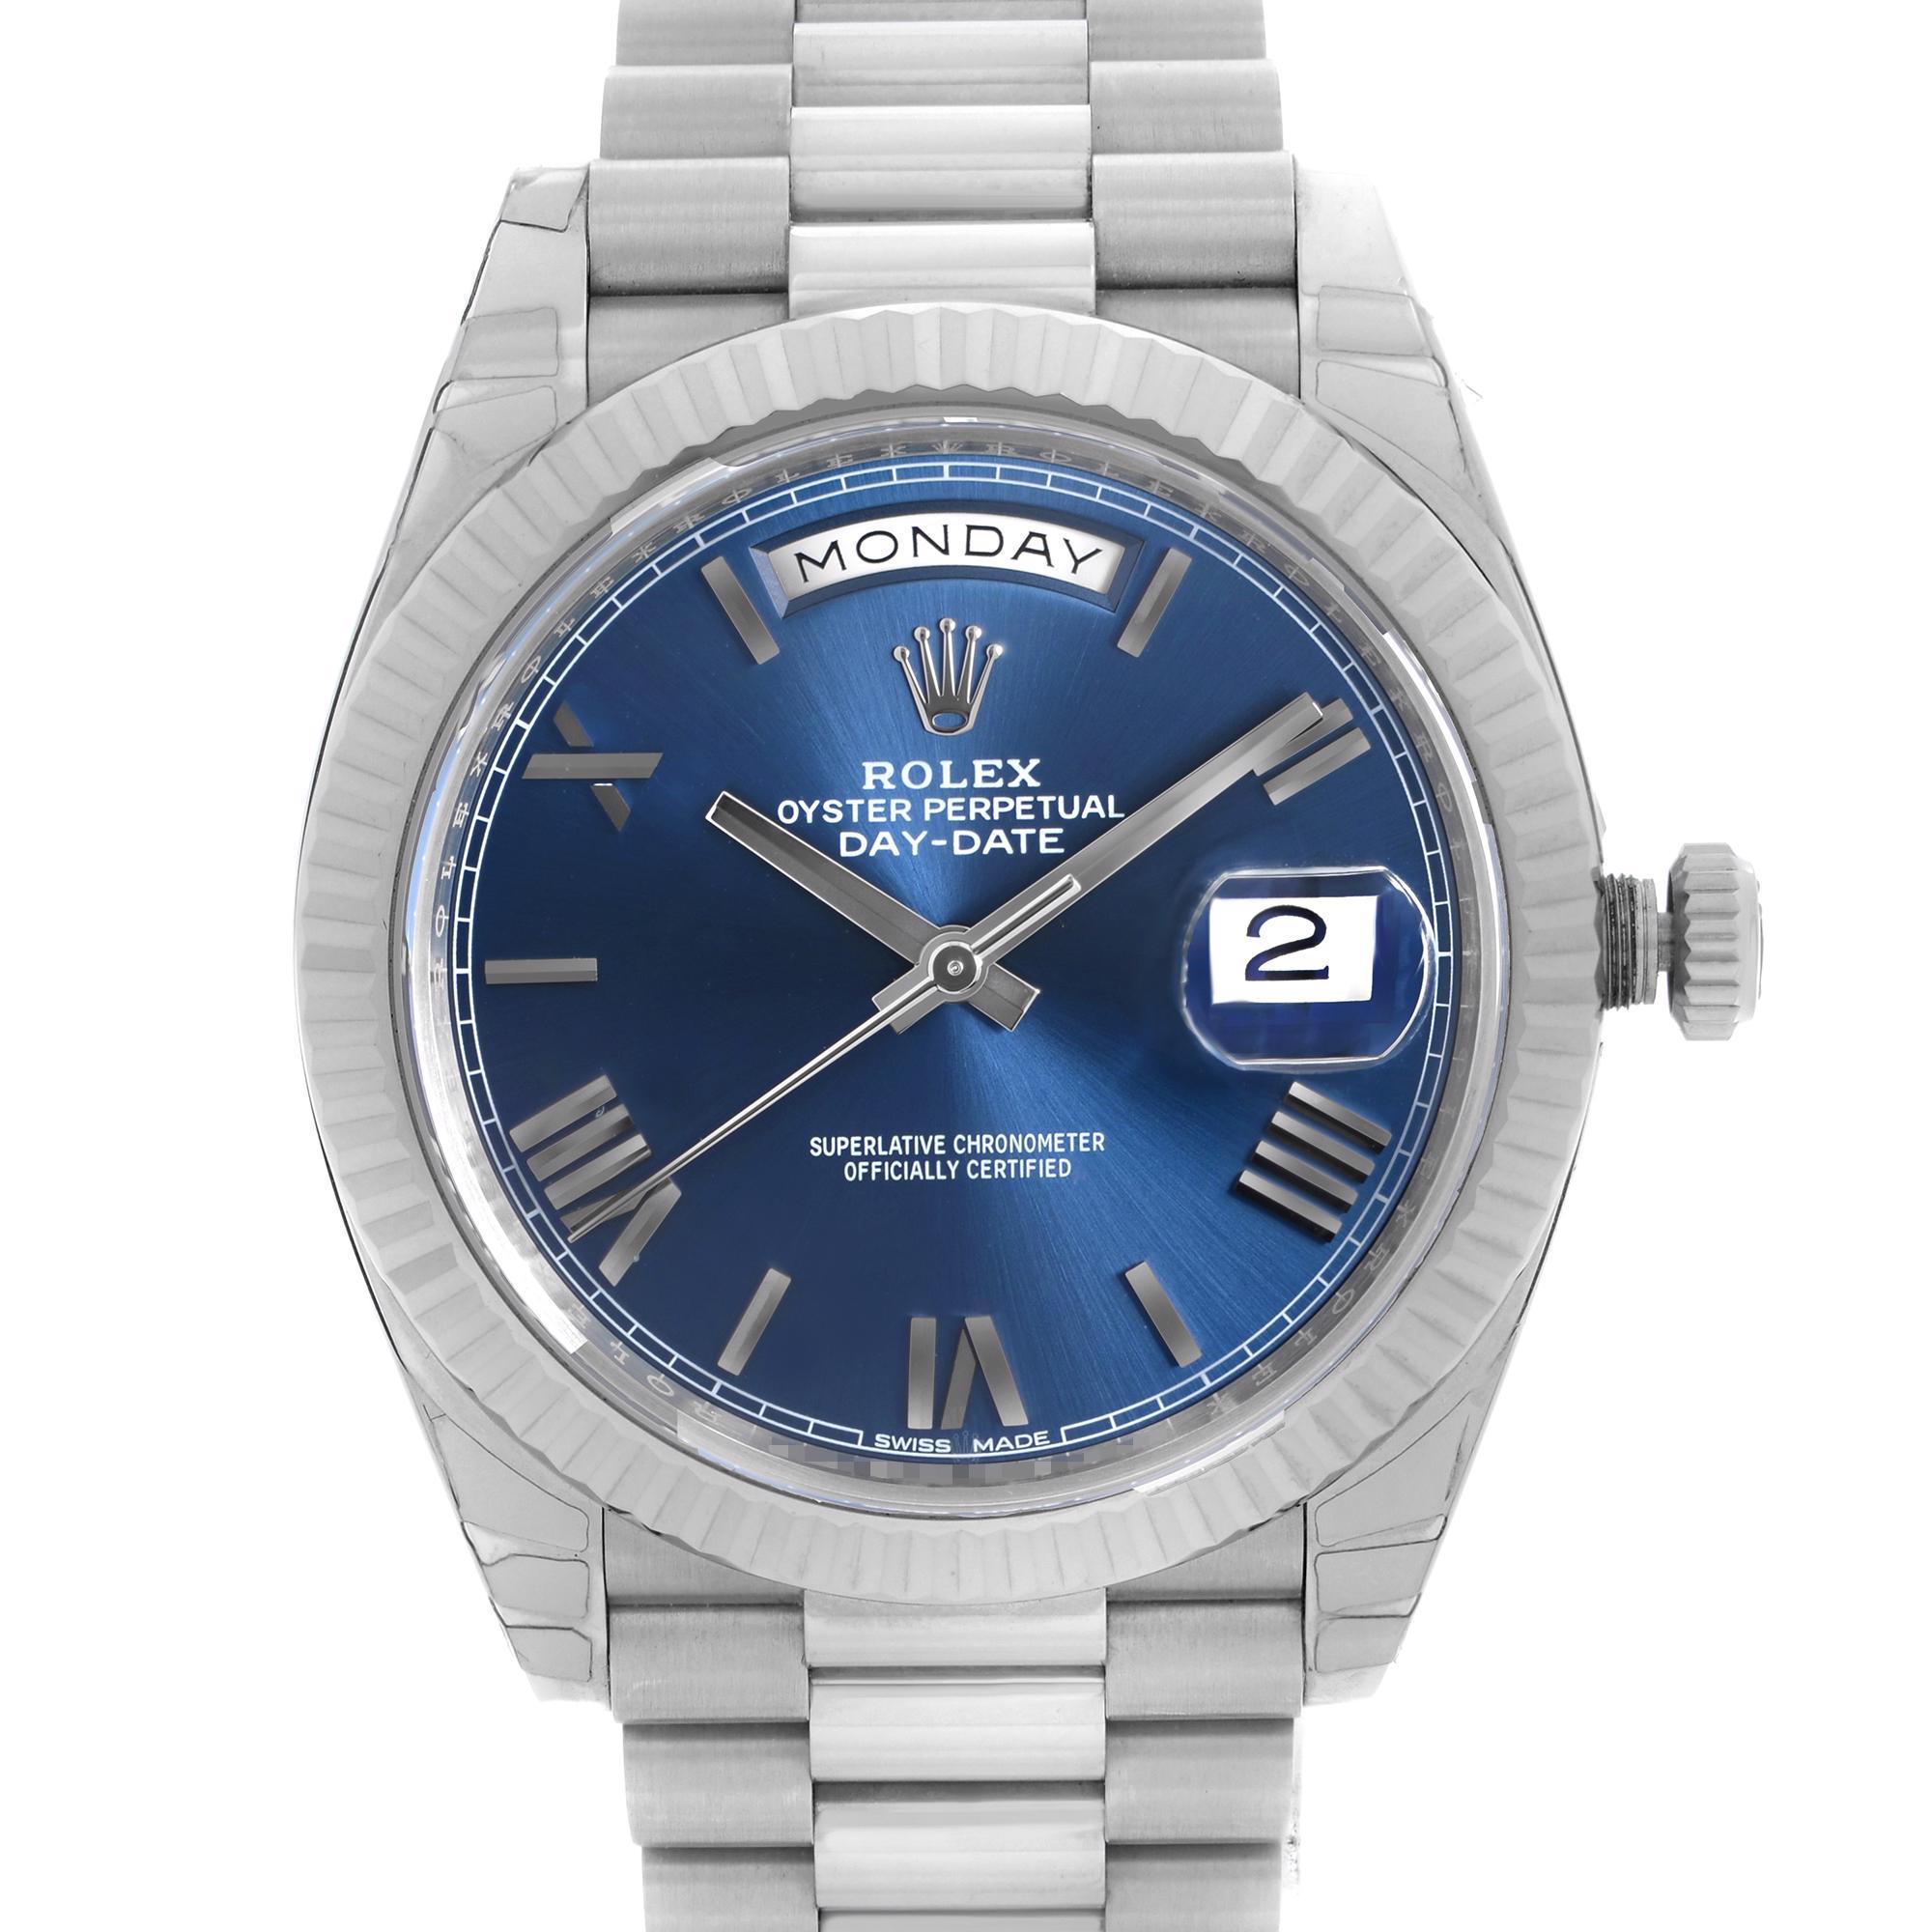 Pre-owned Rolex Day-Date President 40mm 18K White Gold Blue Dial Automatic Watch 228239. This Beautiful Timepiece Come with a 2018 Card and is Powered by Mechanical (Automatic) Movement And Features: Round 18k White Gold Case With a 18k White Gold